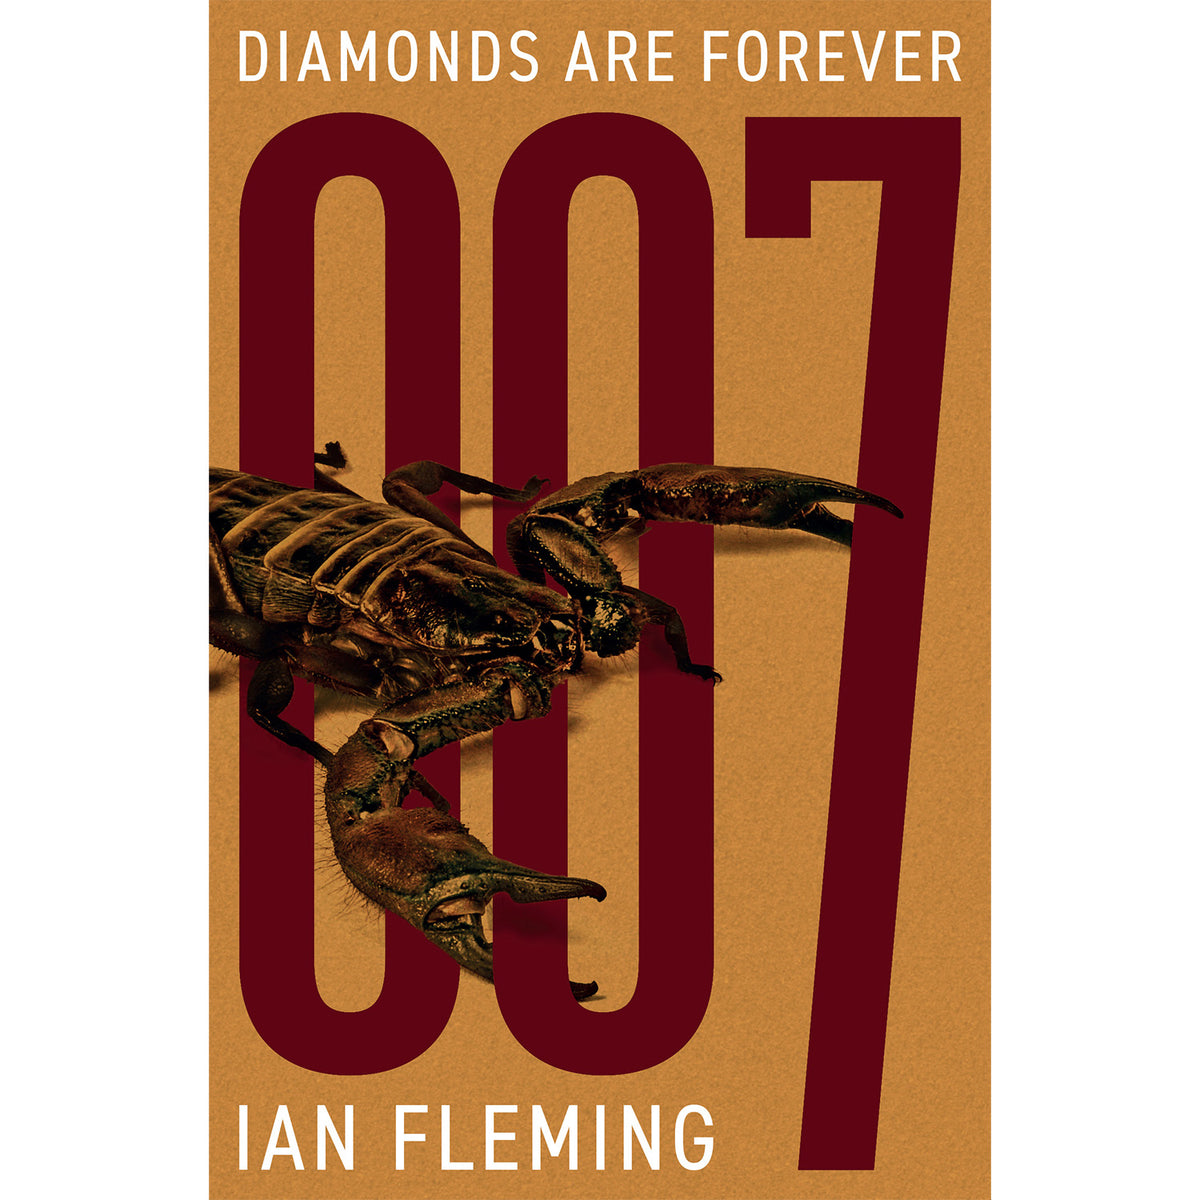 James Bond Diamonds Are Forever Book - By Ian Fleming